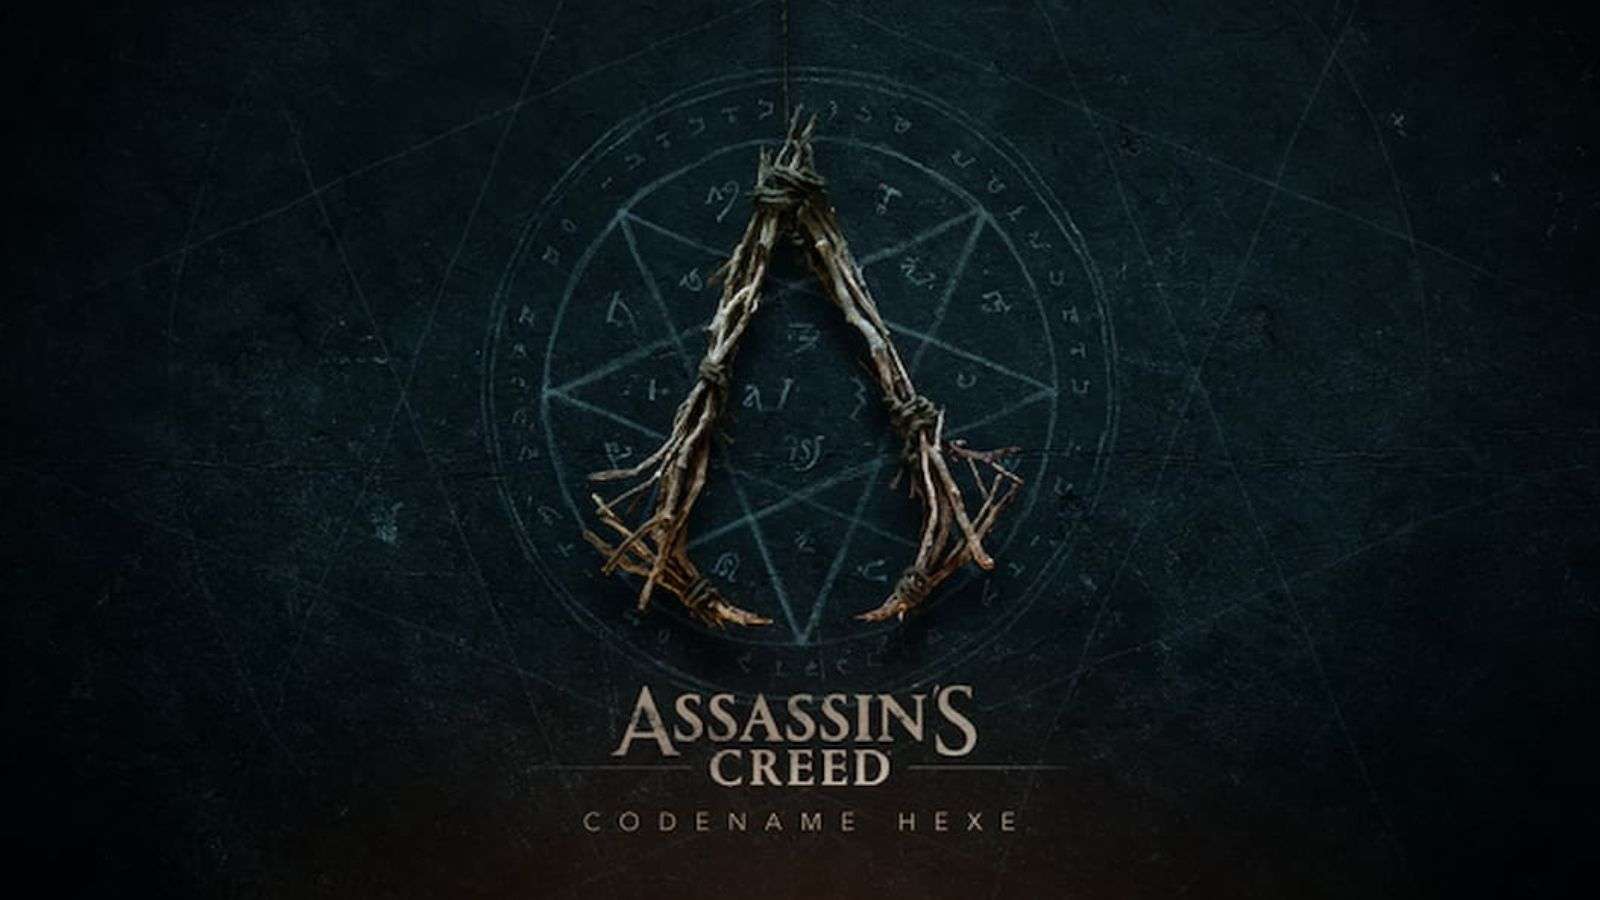 Assassins Creed Hexe cover